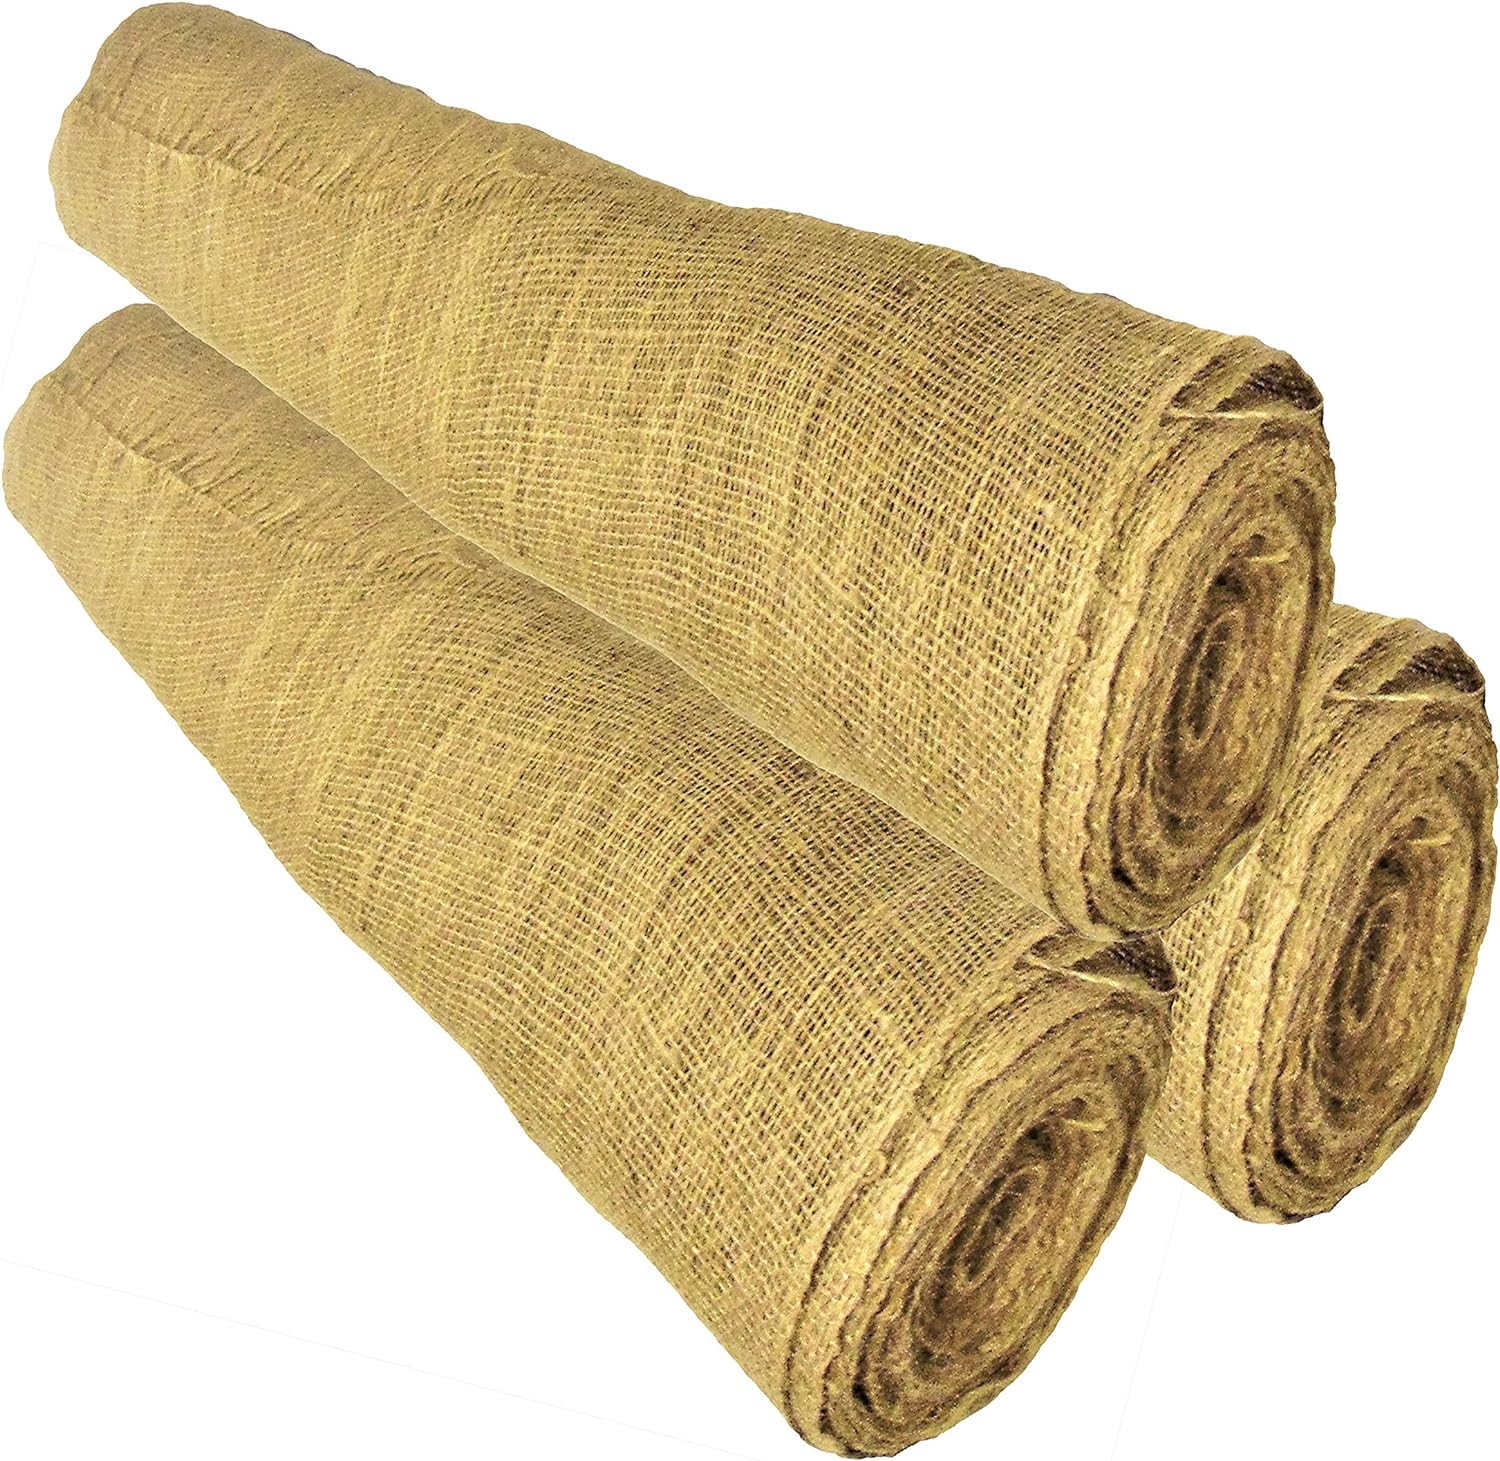 Natural Burlap Fabric, Burlap Fabric roll with Finished Edges